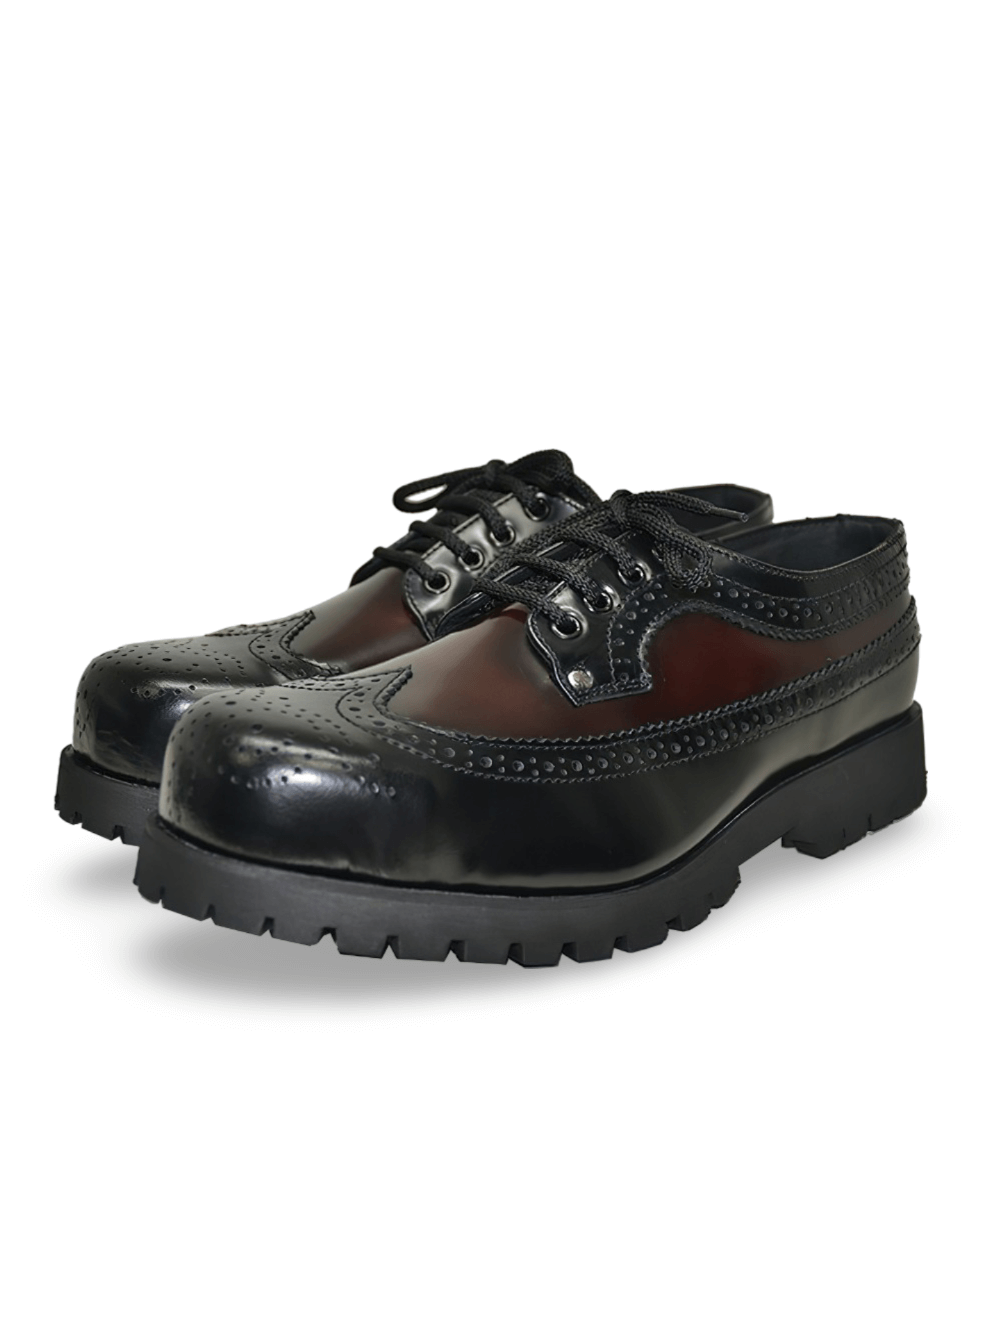 Black And Burgundy Lace-Up Ranger Shoes with Steel Toe